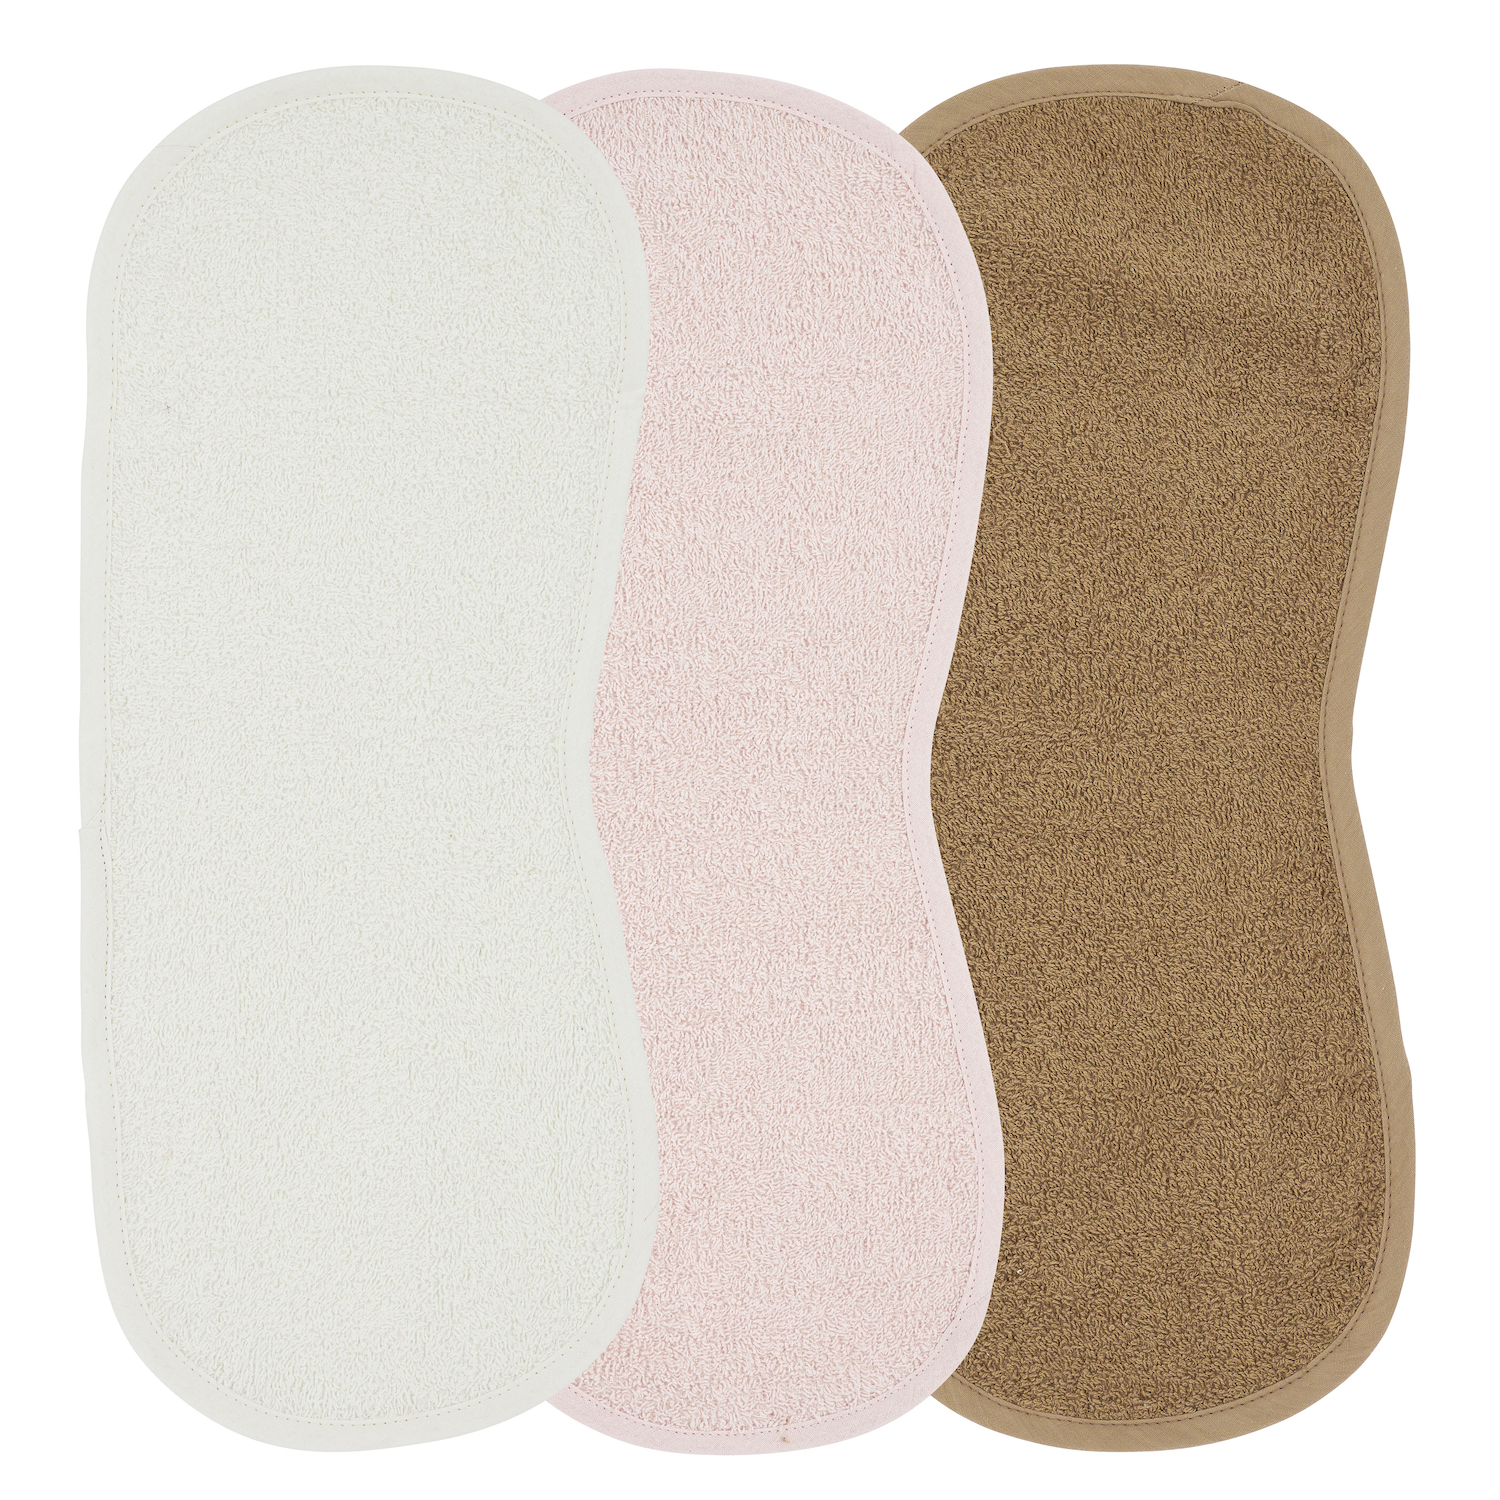 Basic Terry Burp Cloths Shoulder Model 3-pack  - Offwhite/Soft Pink/Toffee - 53x20cm